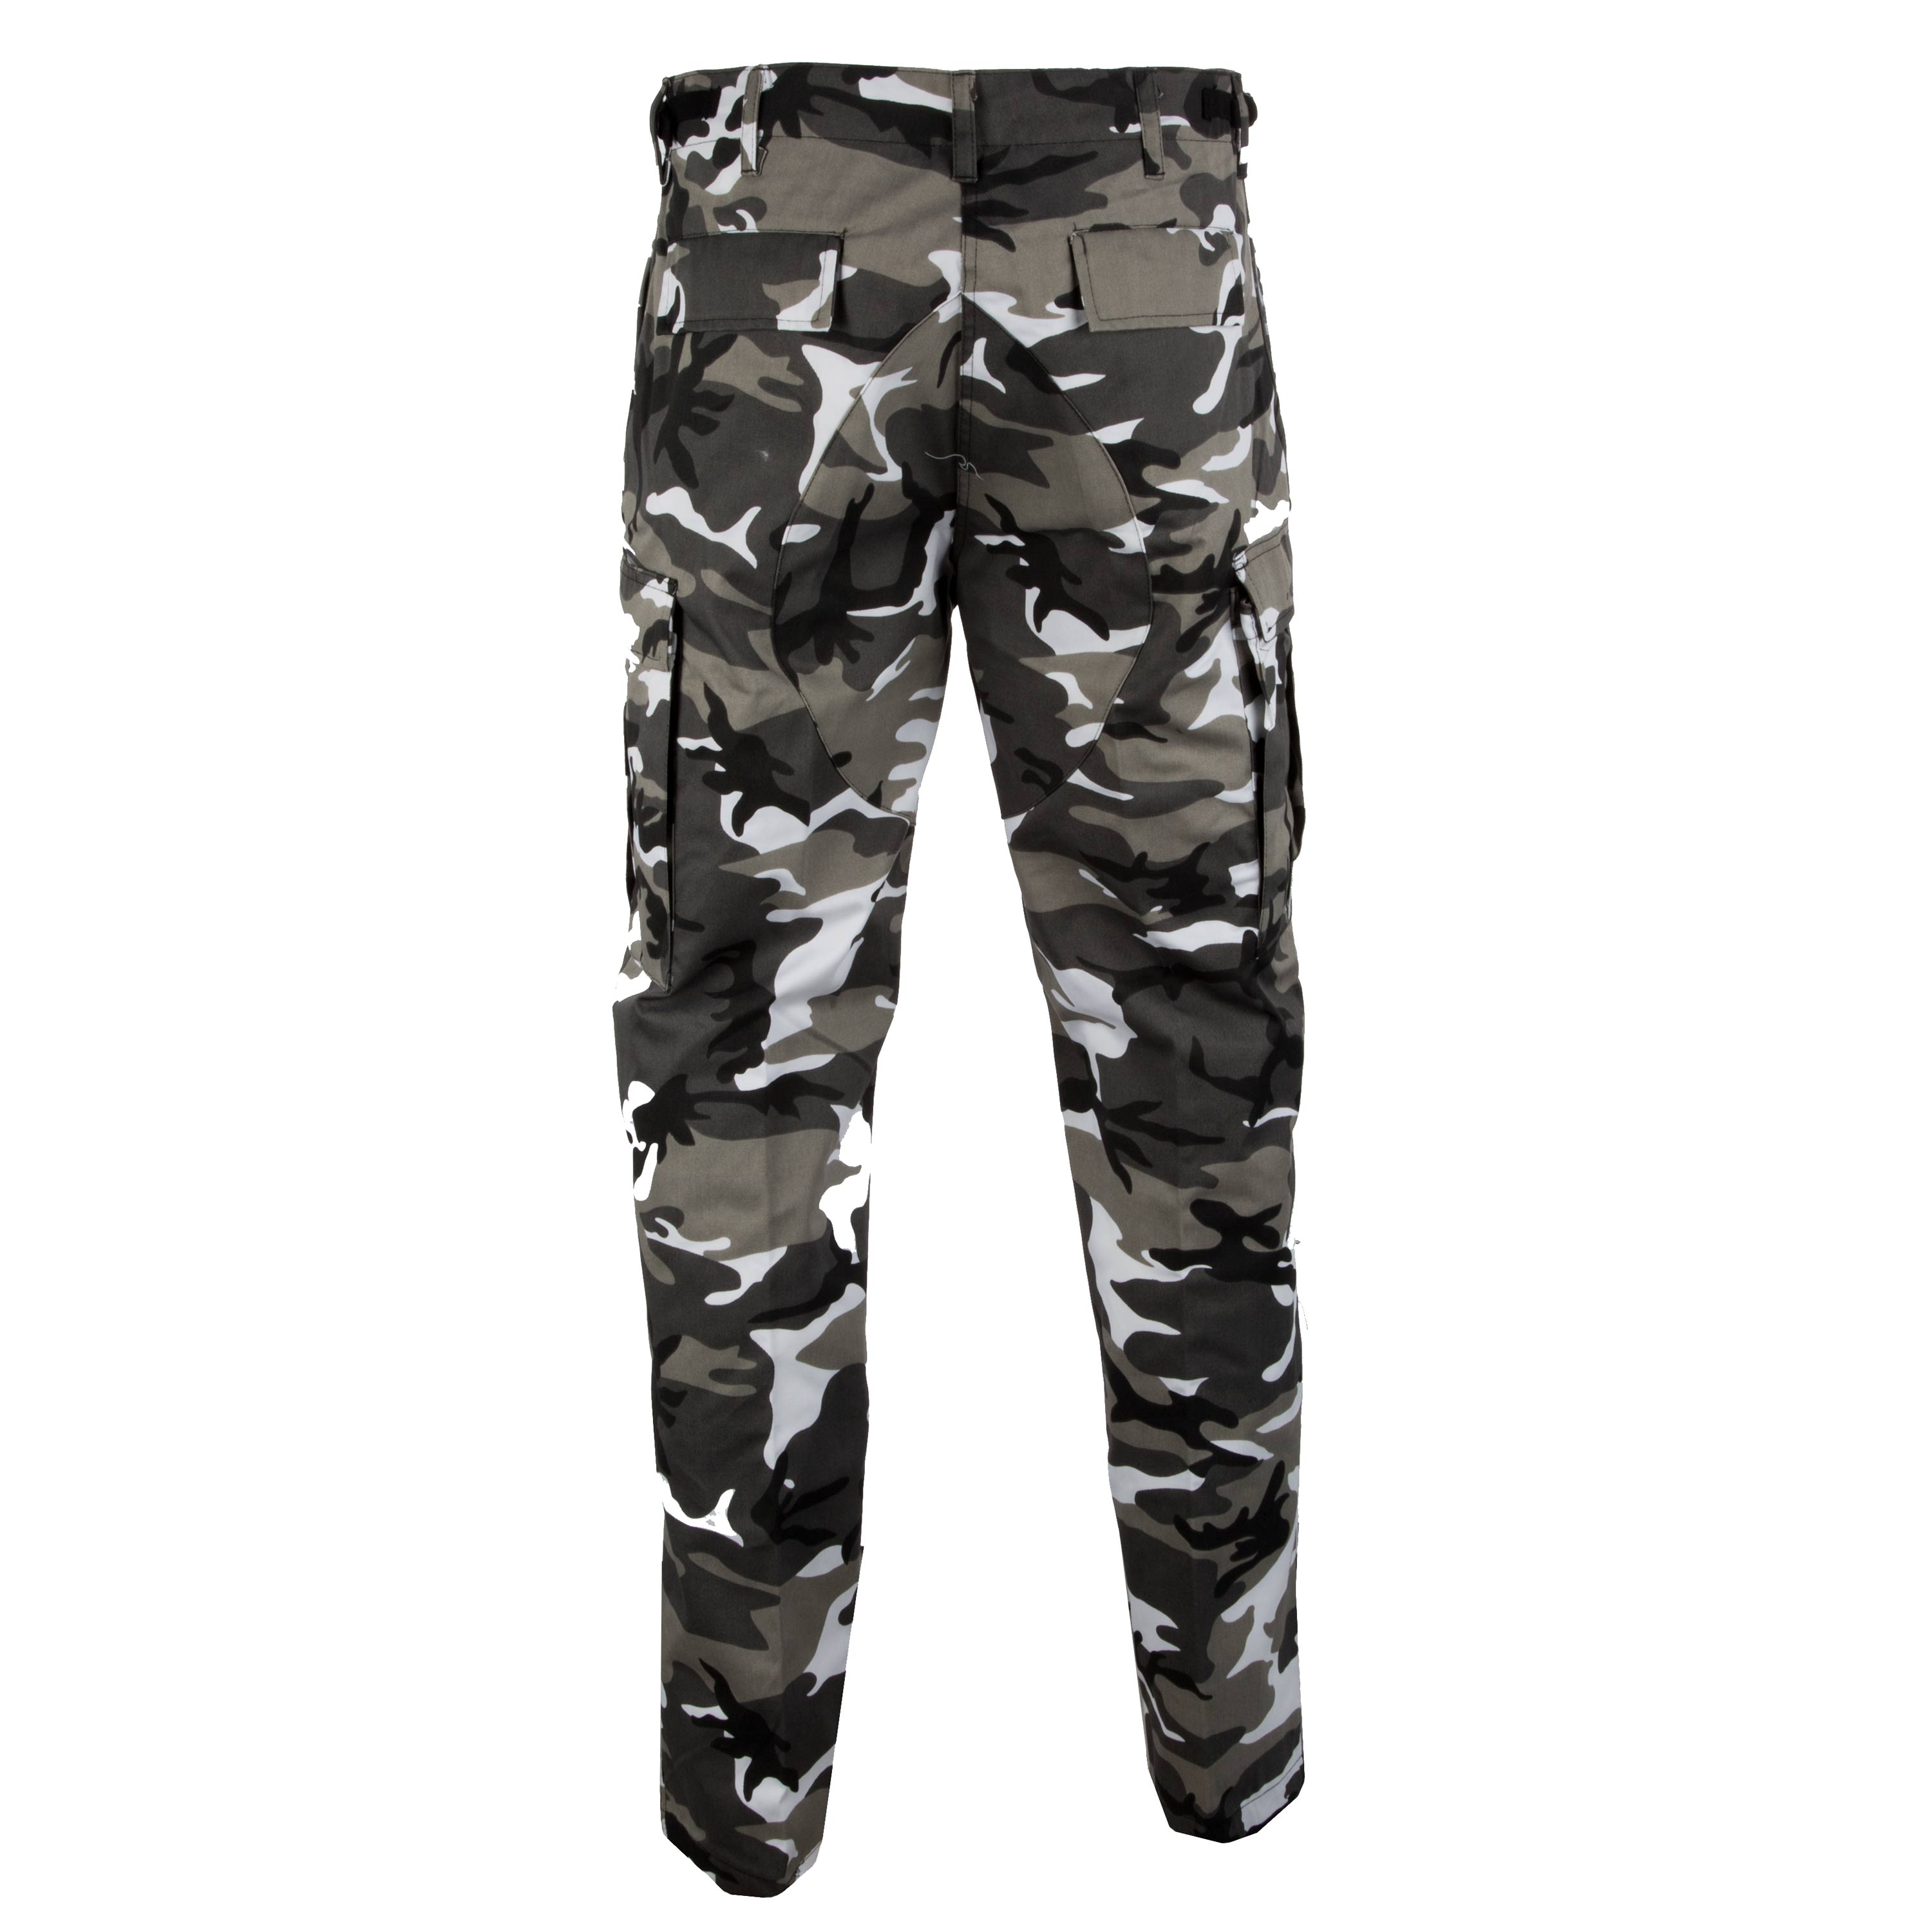 Purchase the Mil-Tec BDU Style Pants urban camo by ASMC